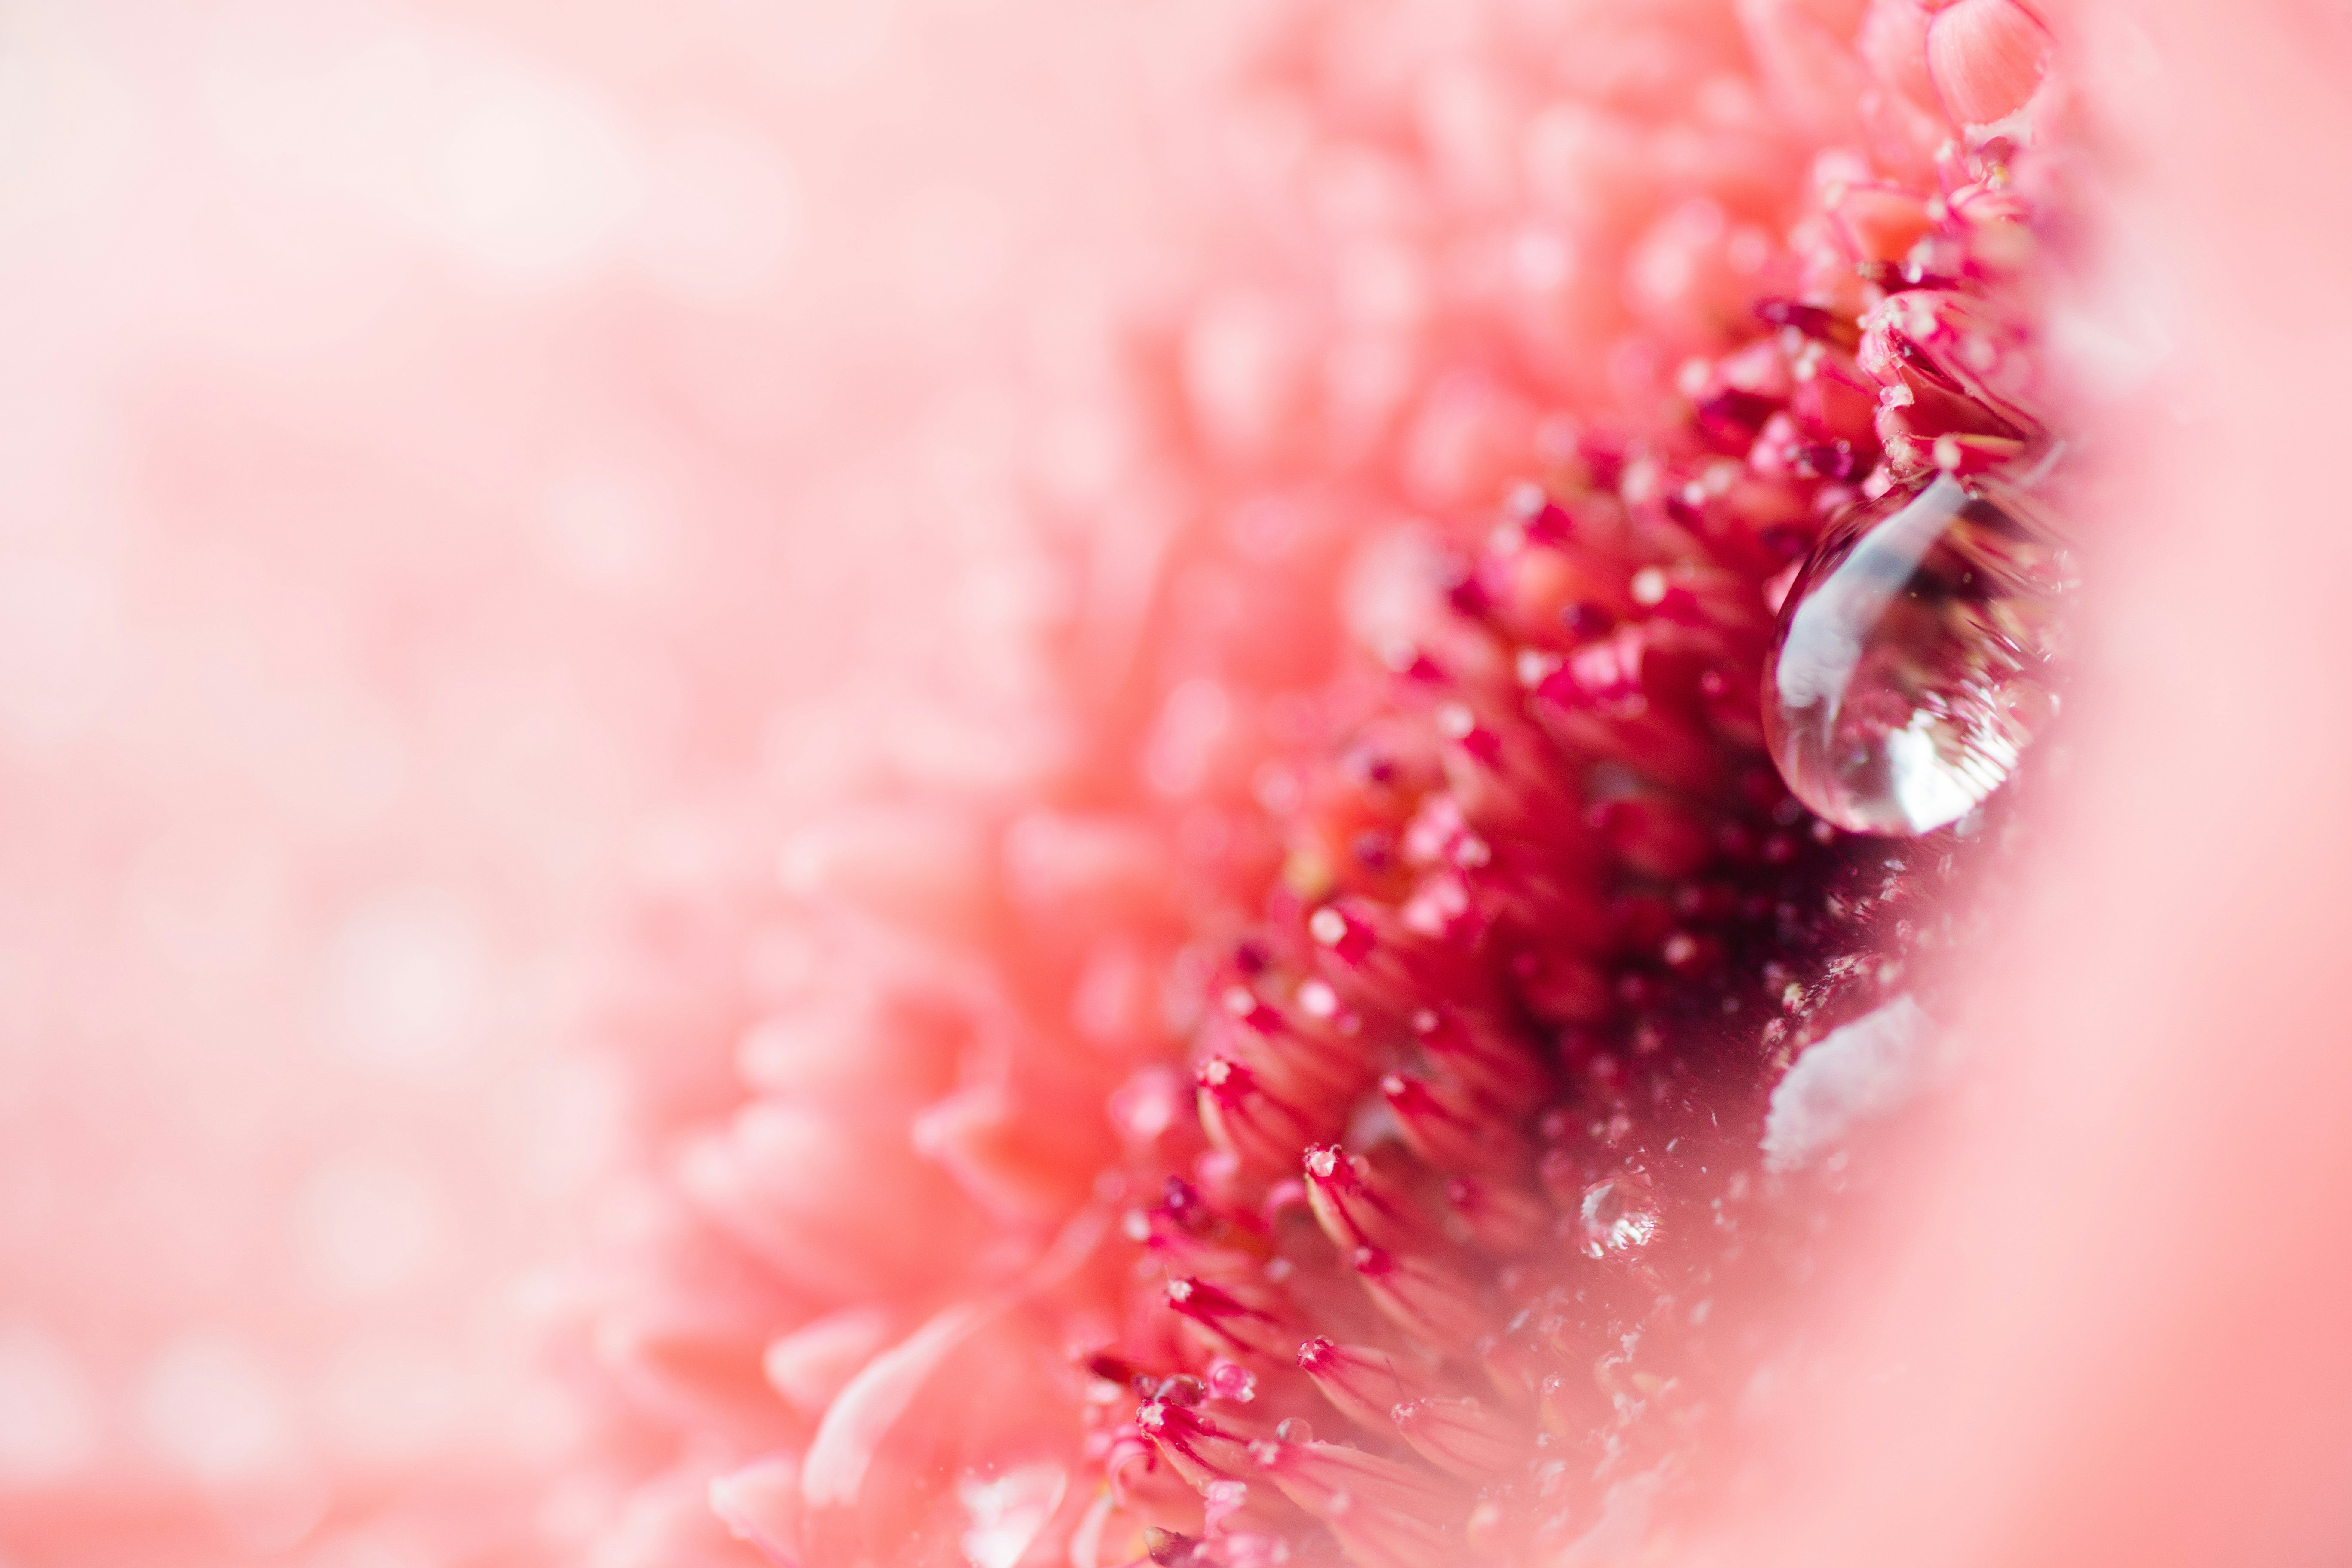 water droplets on pink flower petals